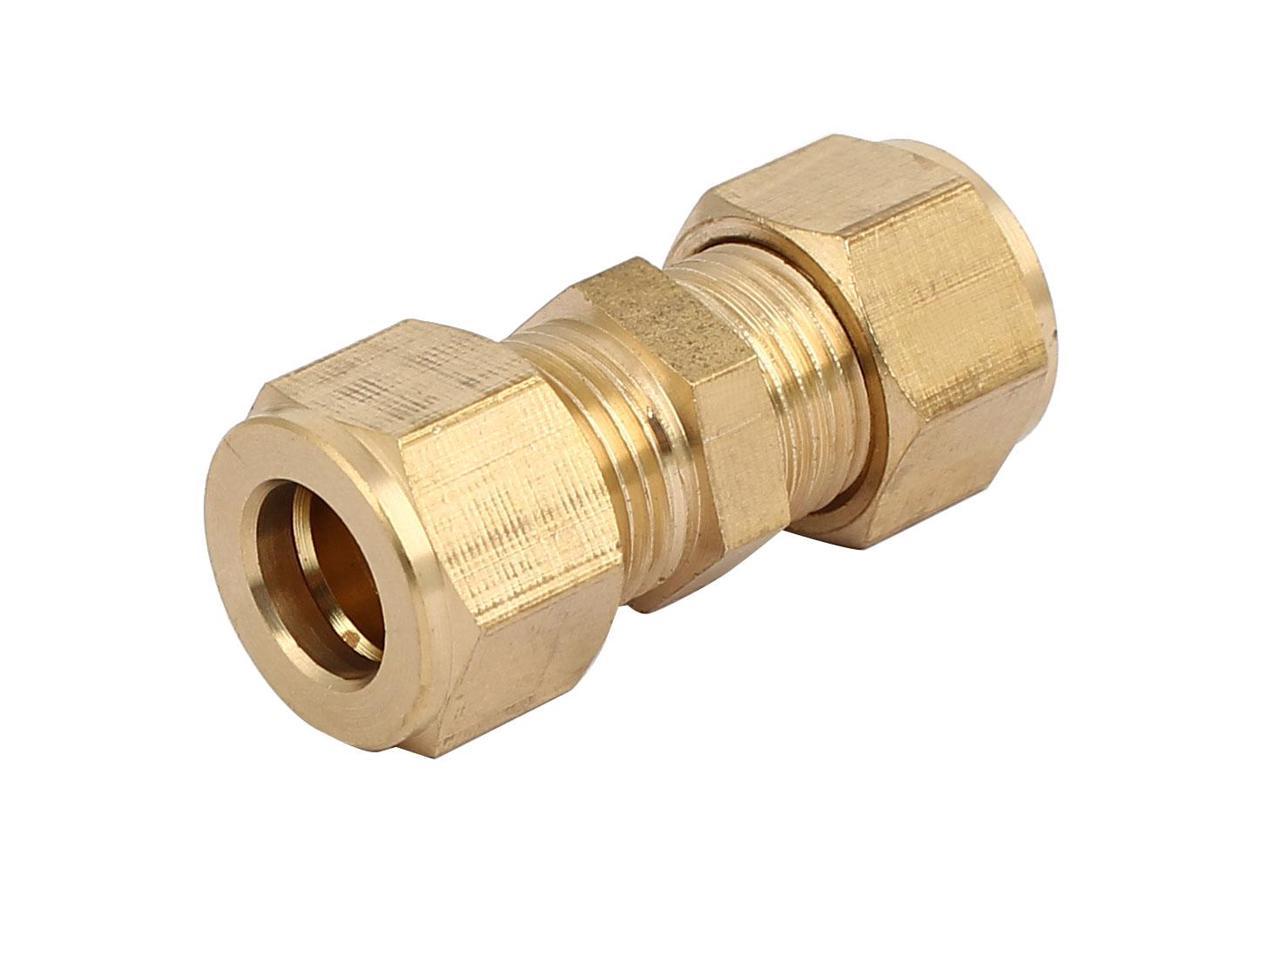 Nozzle Adapter Straight Connecting Fittings For 9 52mm 3 8 Inch Dia Pipe Newegg Com